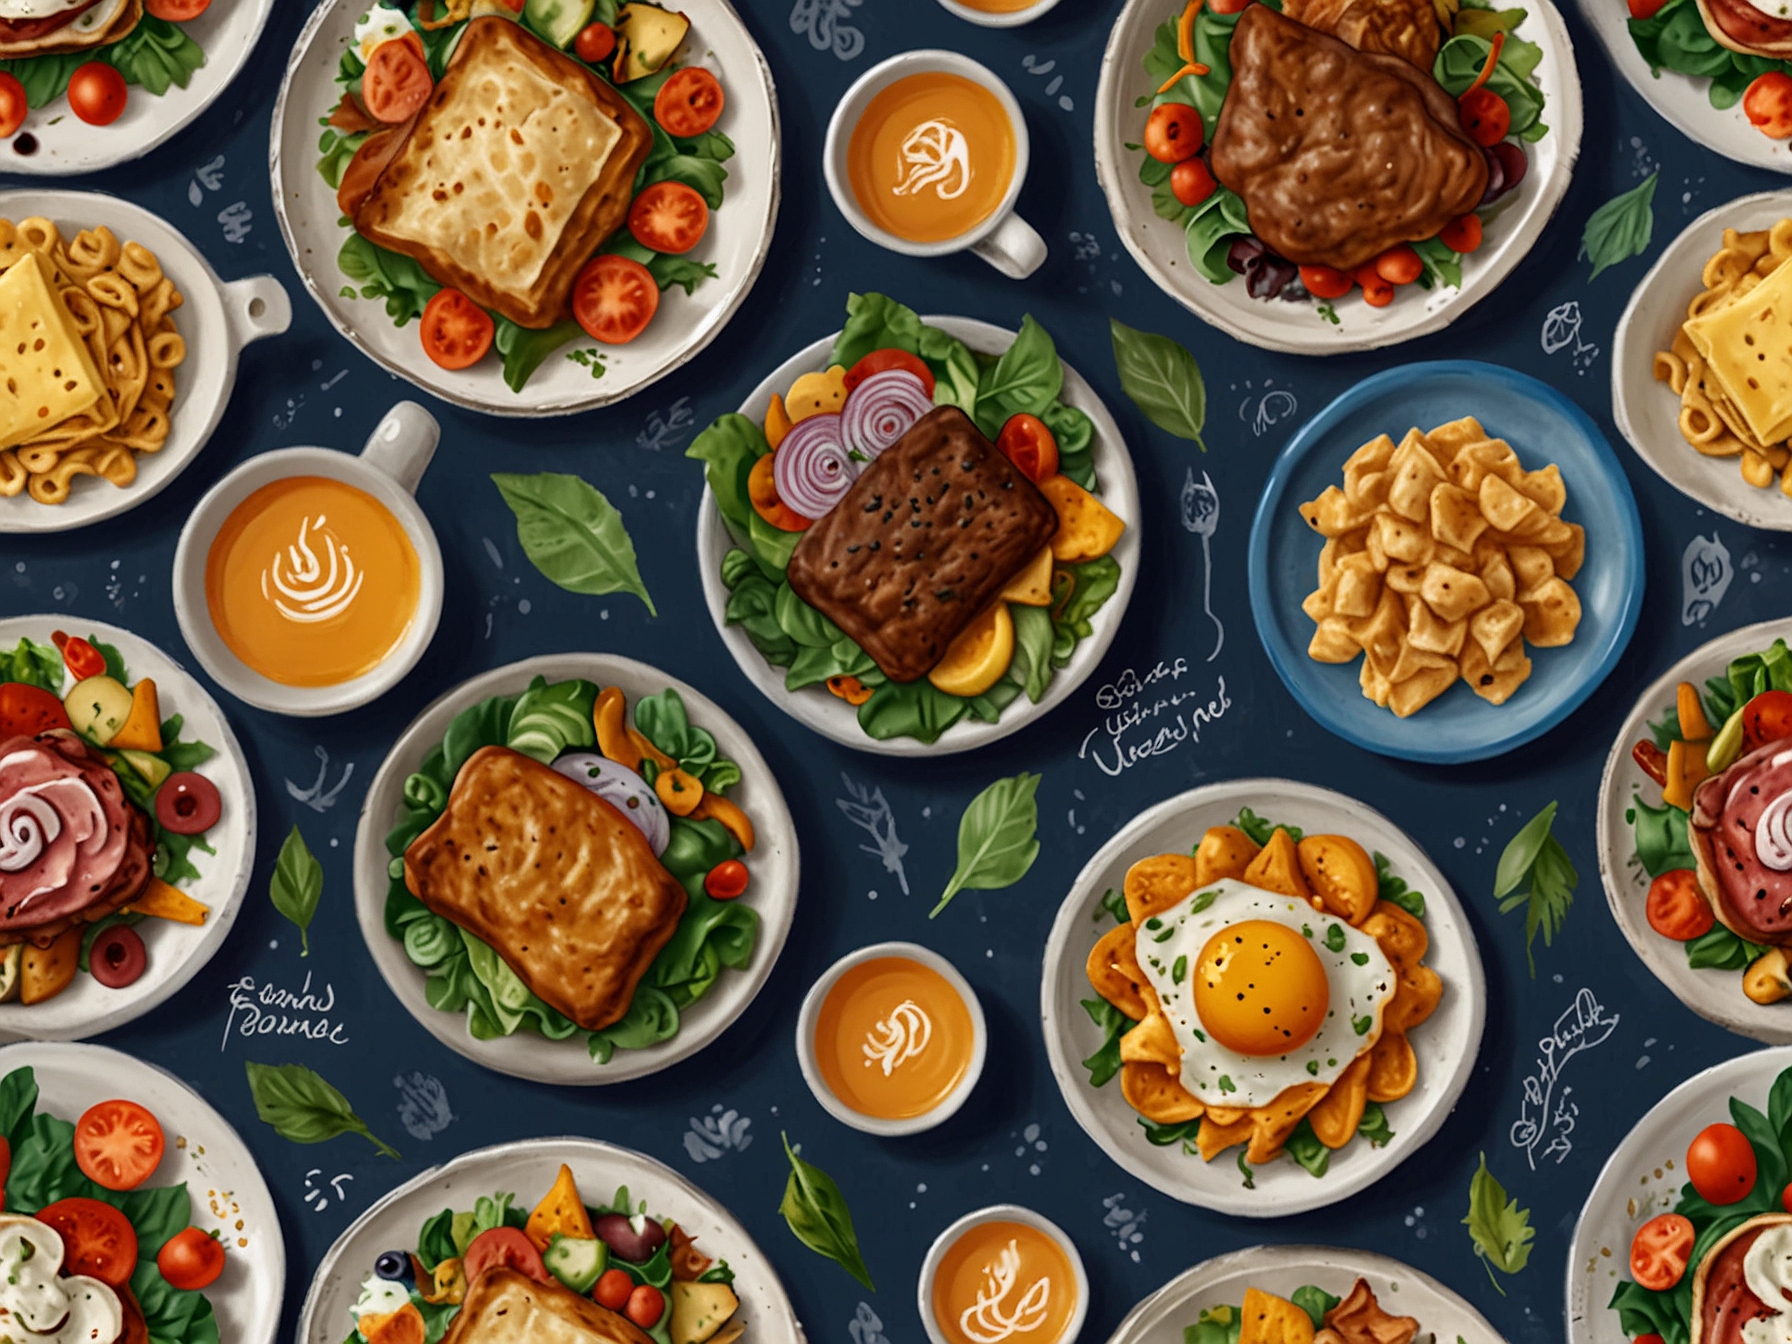 An array of Perkins' updated menu items, featuring hearty breakfast dishes, fresh salads, and vibrant plant-based meals, reflecting the modernized culinary offerings of the rebrand.